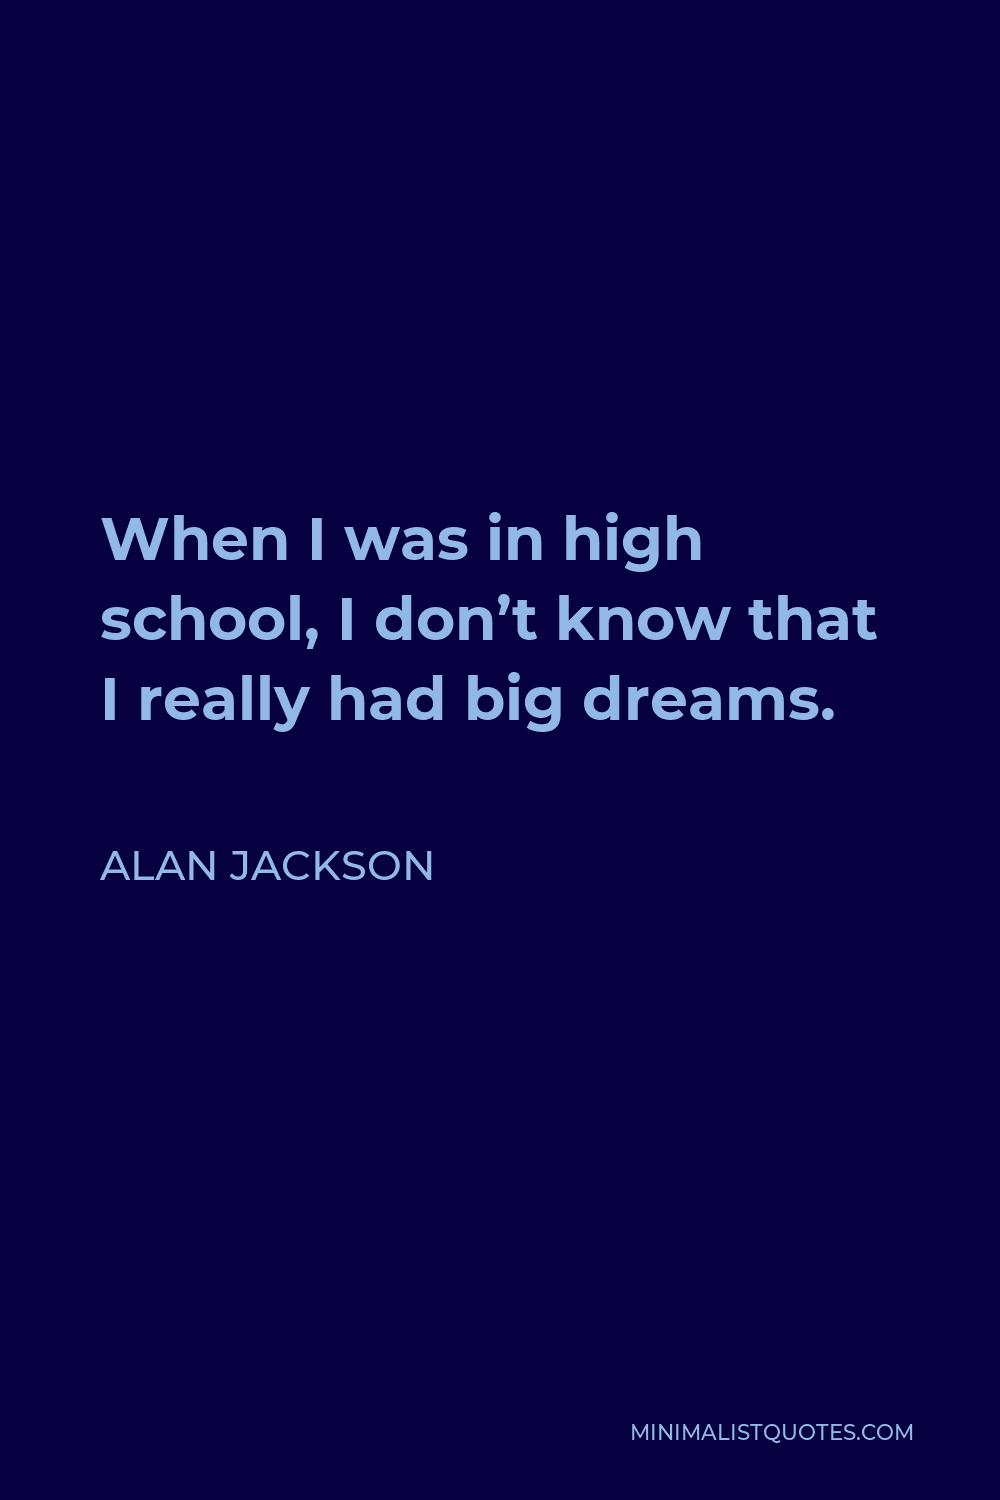 Alan Jackson Quote - When I was in high school, I don’t know that I really had big dreams.